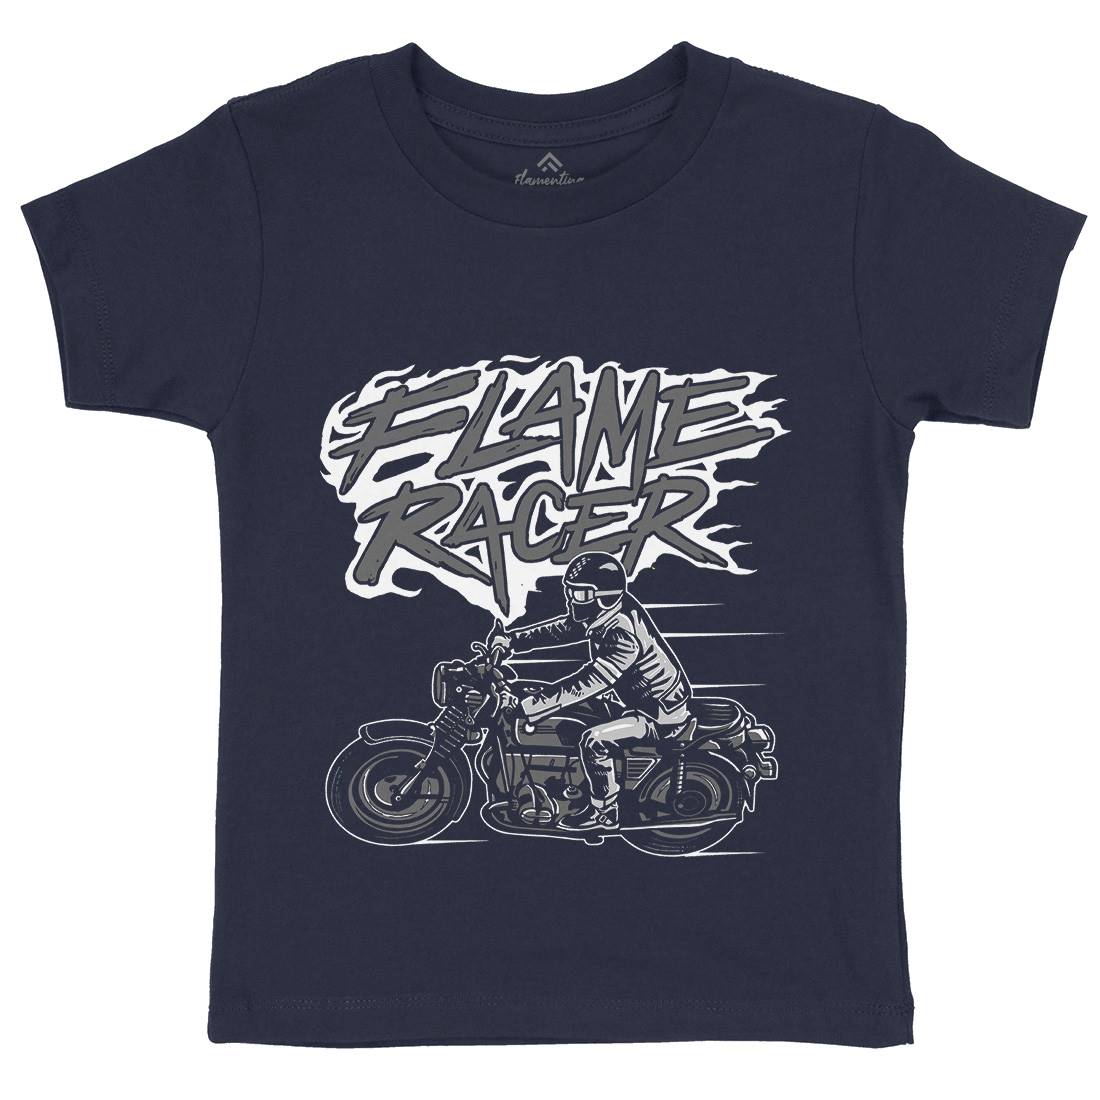 Flame Racer Kids Crew Neck T-Shirt Motorcycles A530